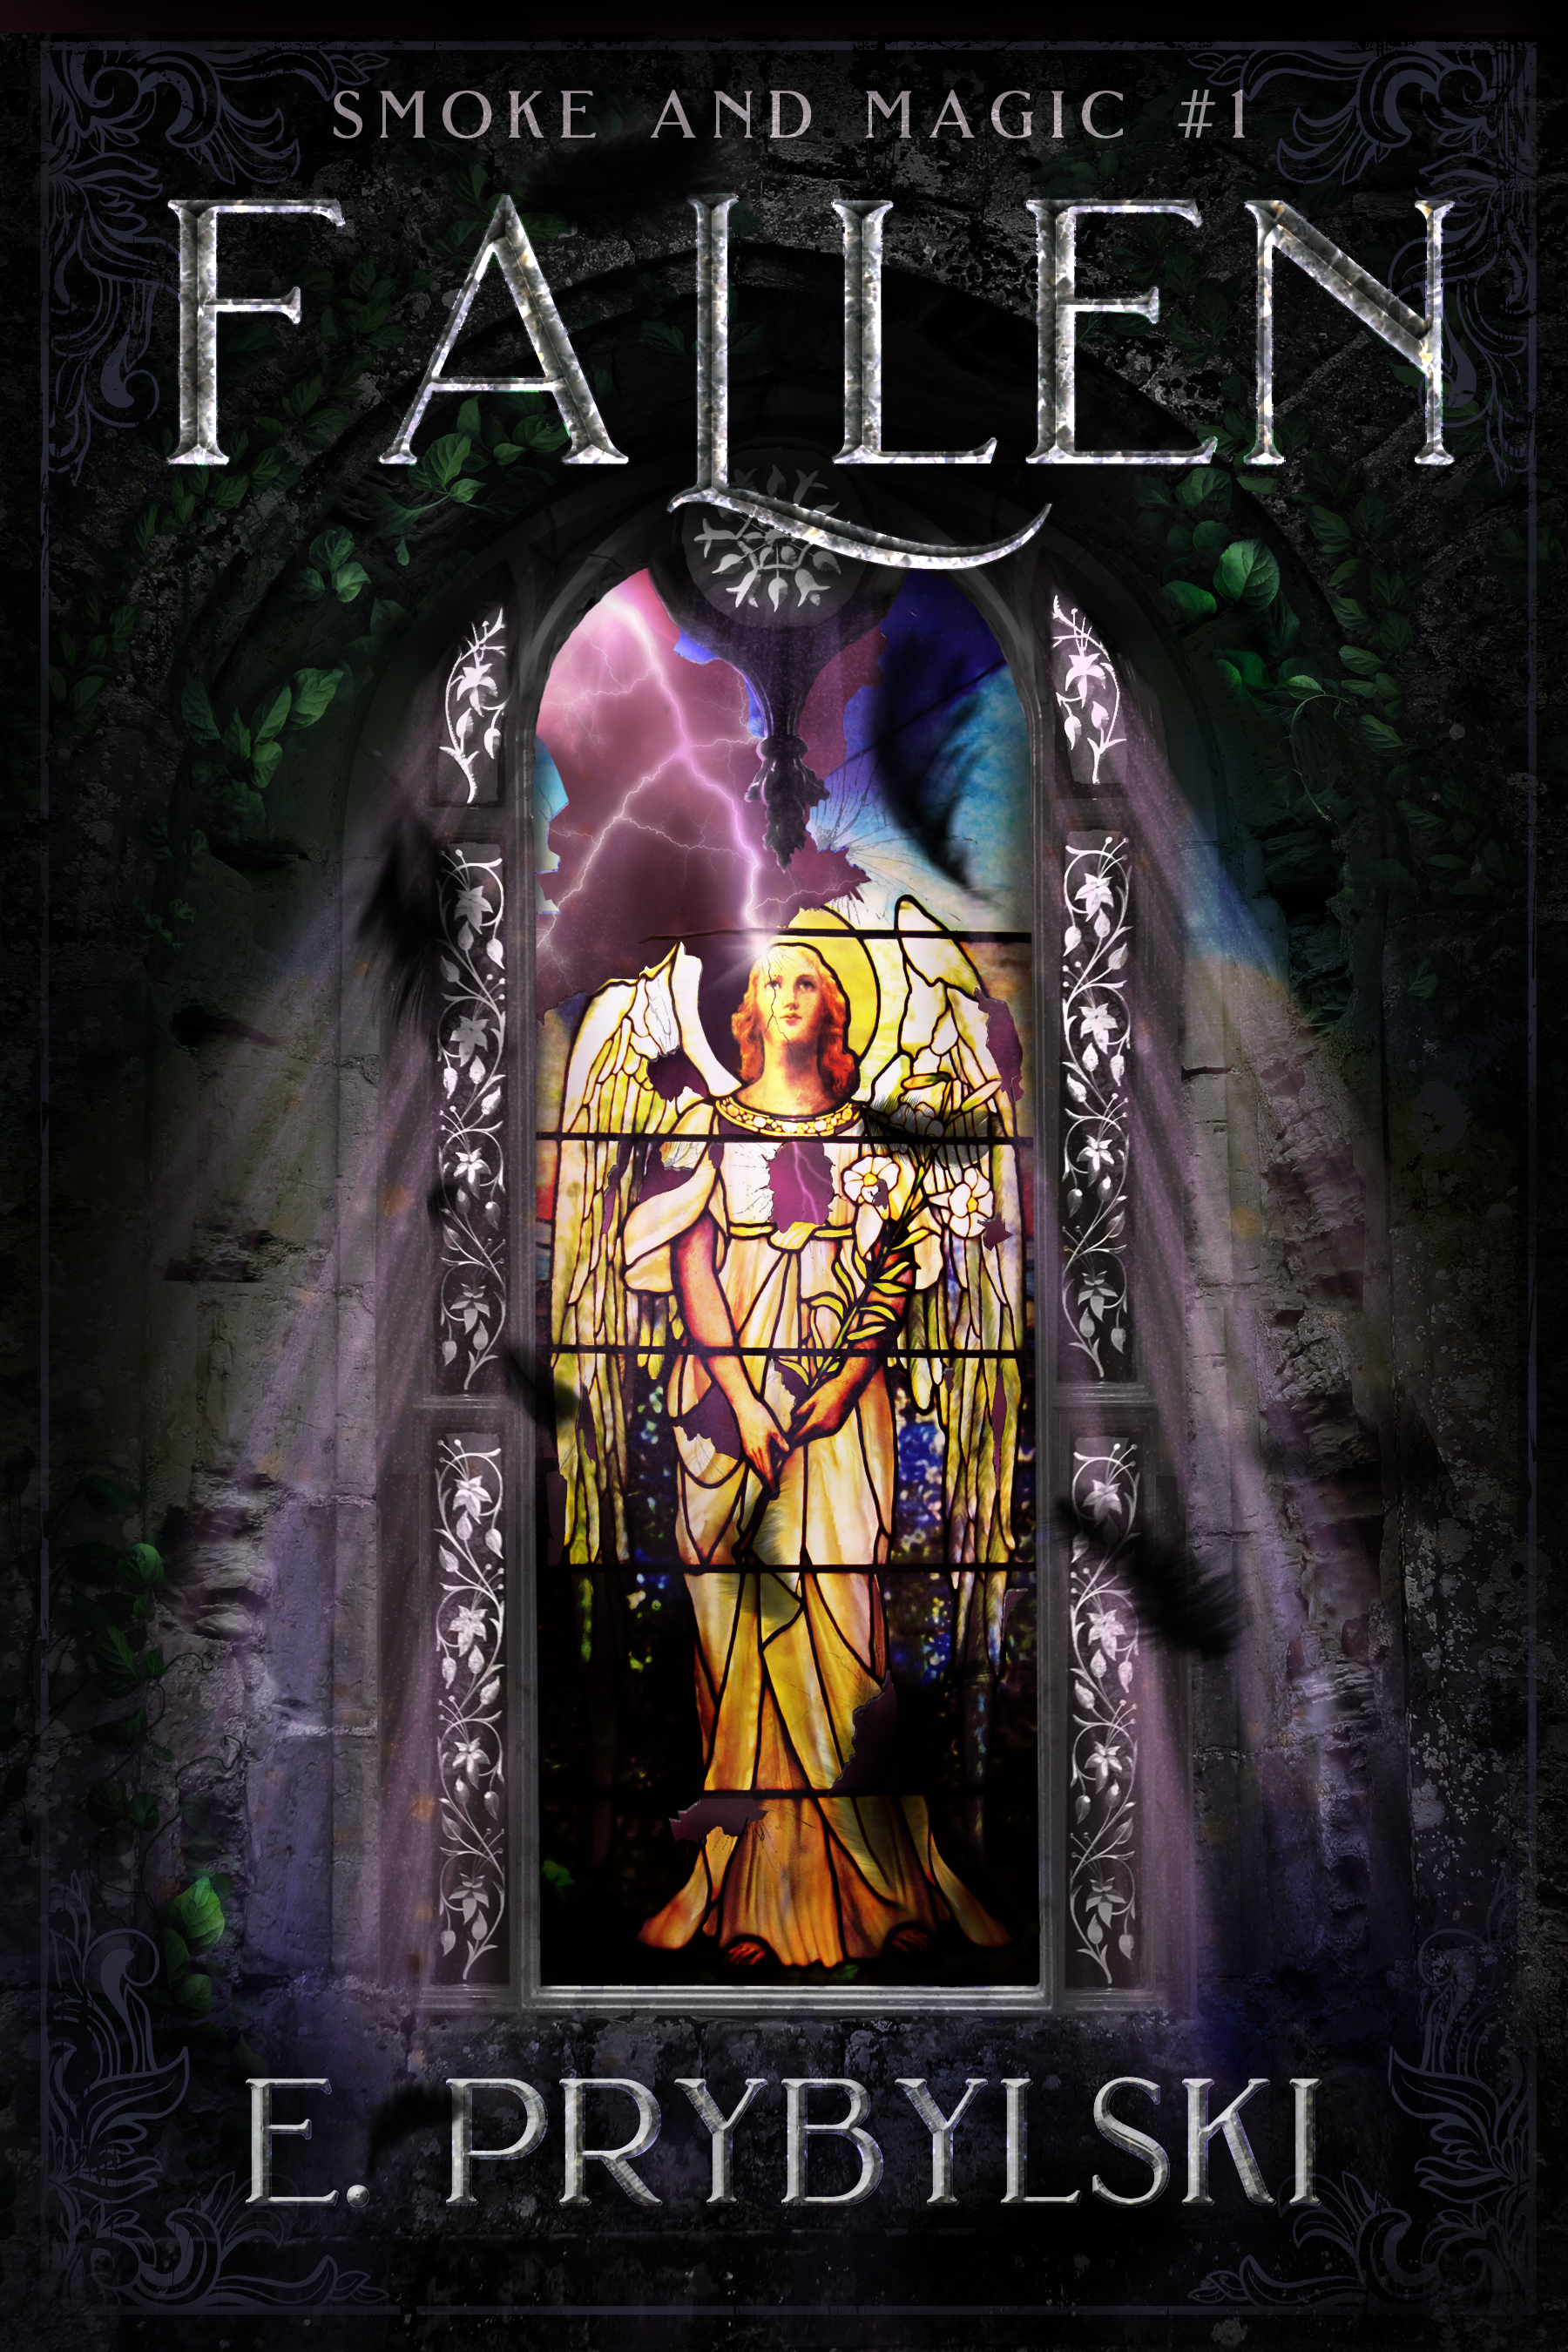 Cover of the book "Fallen" by E. Prybylski. Features a broken stained glass window of an angel.